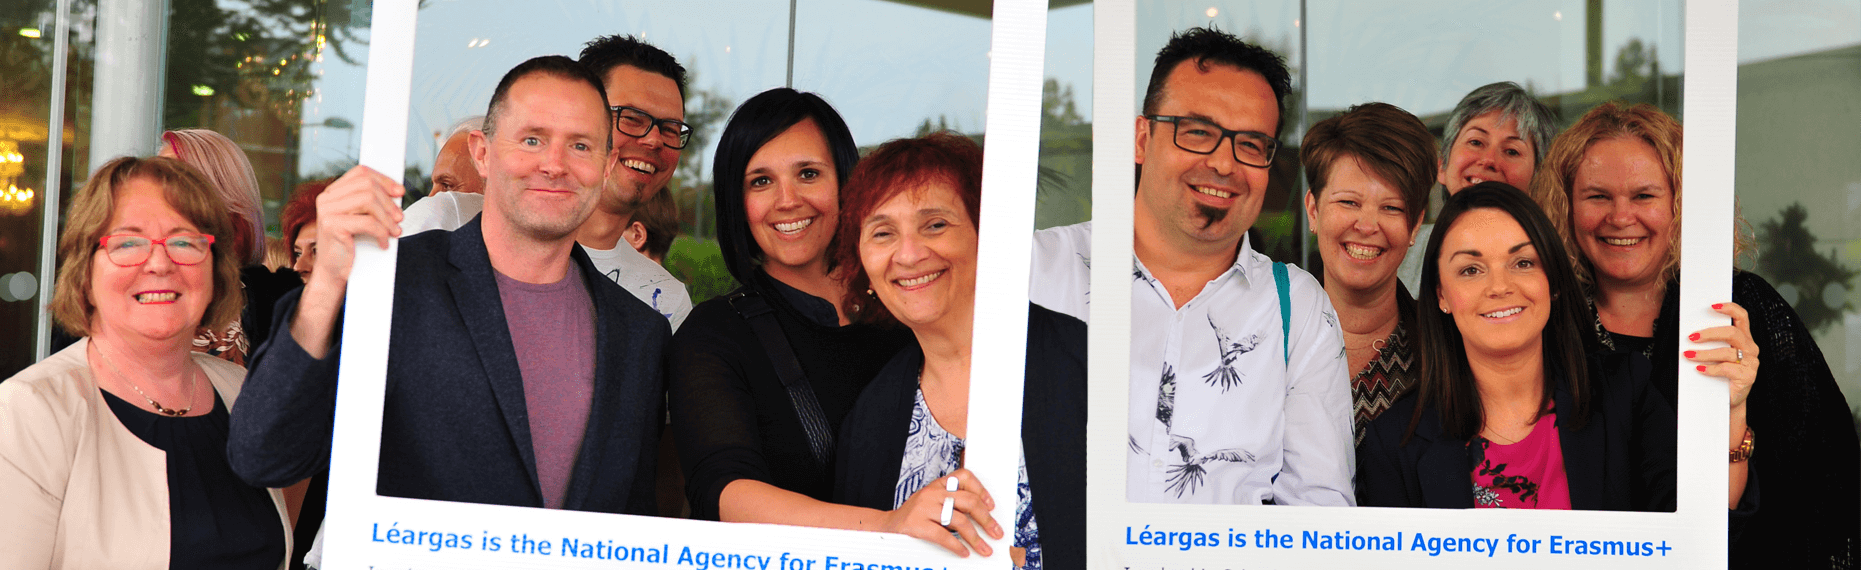 Banner image of a group of Adult learners looking at the camera and smiling holding signs that read 'Léargas is the National agency for Erasmus+'